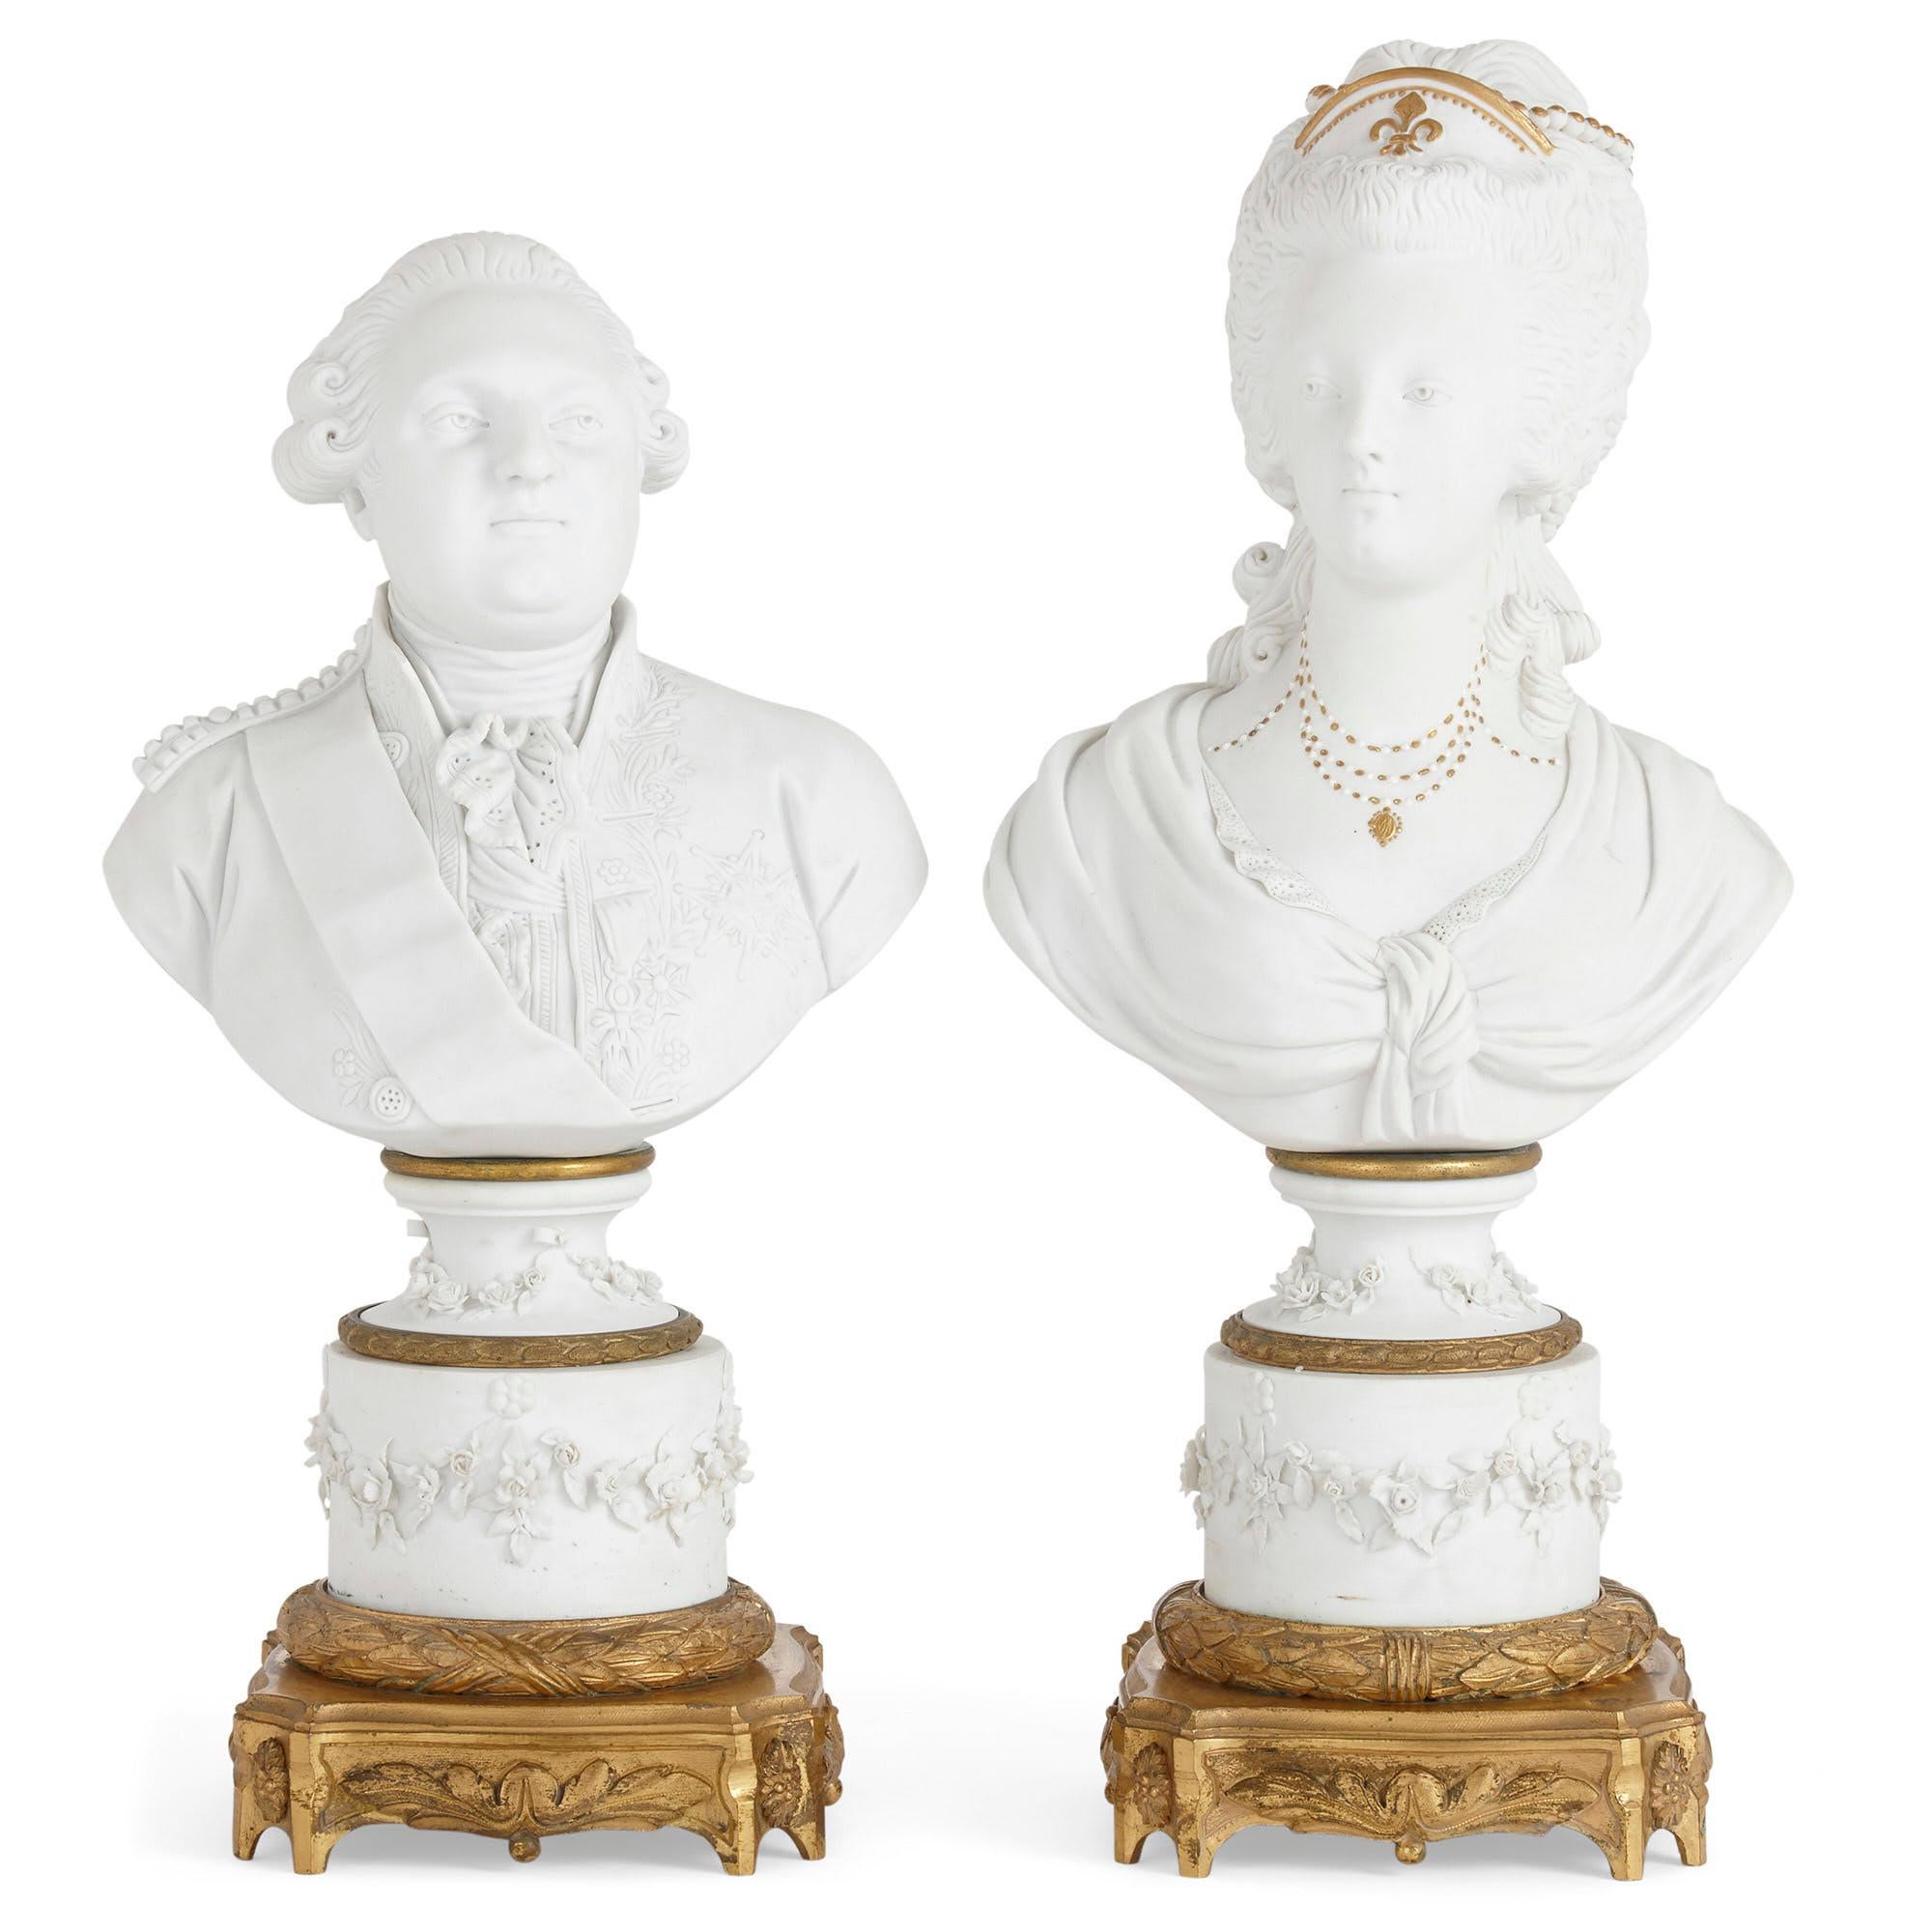 This pair of busts depicts the former King and Queen of France, Louis XVI and Marie Antoinette. The busts are crafted from unglazed white porcelain, known as bisque, or biscuit. Each porcelain bust is raised by a gilt bronze base, which supports a